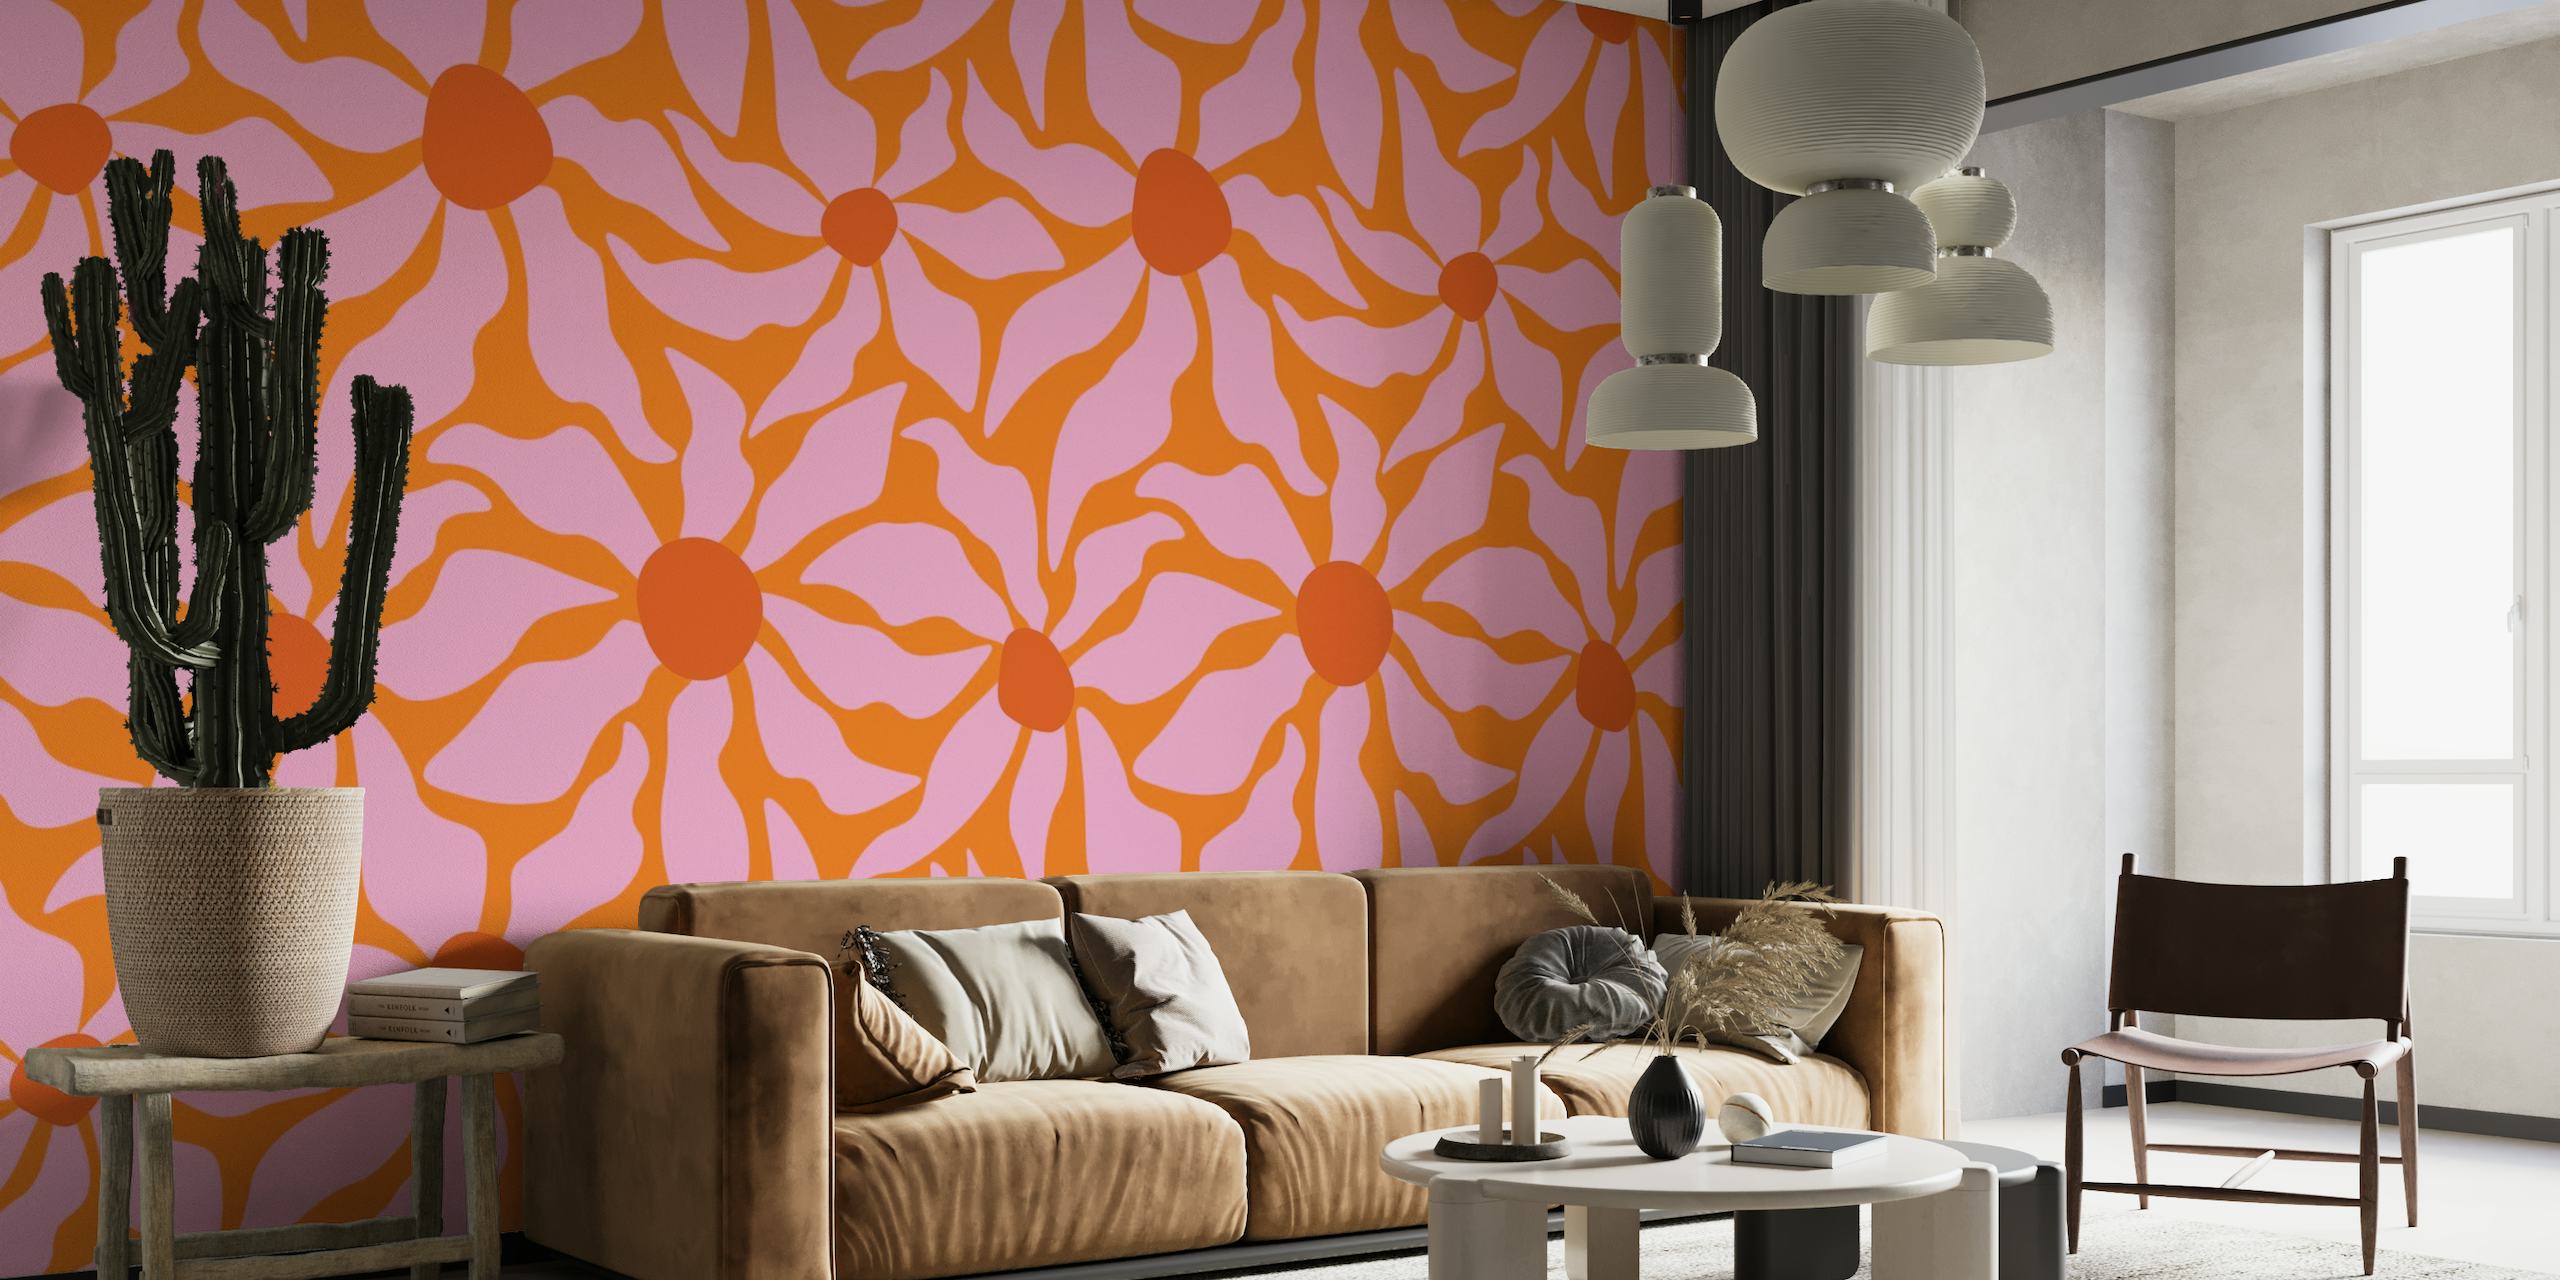 Vibrant orange and pink abstract floral wall mural with a retro groove design